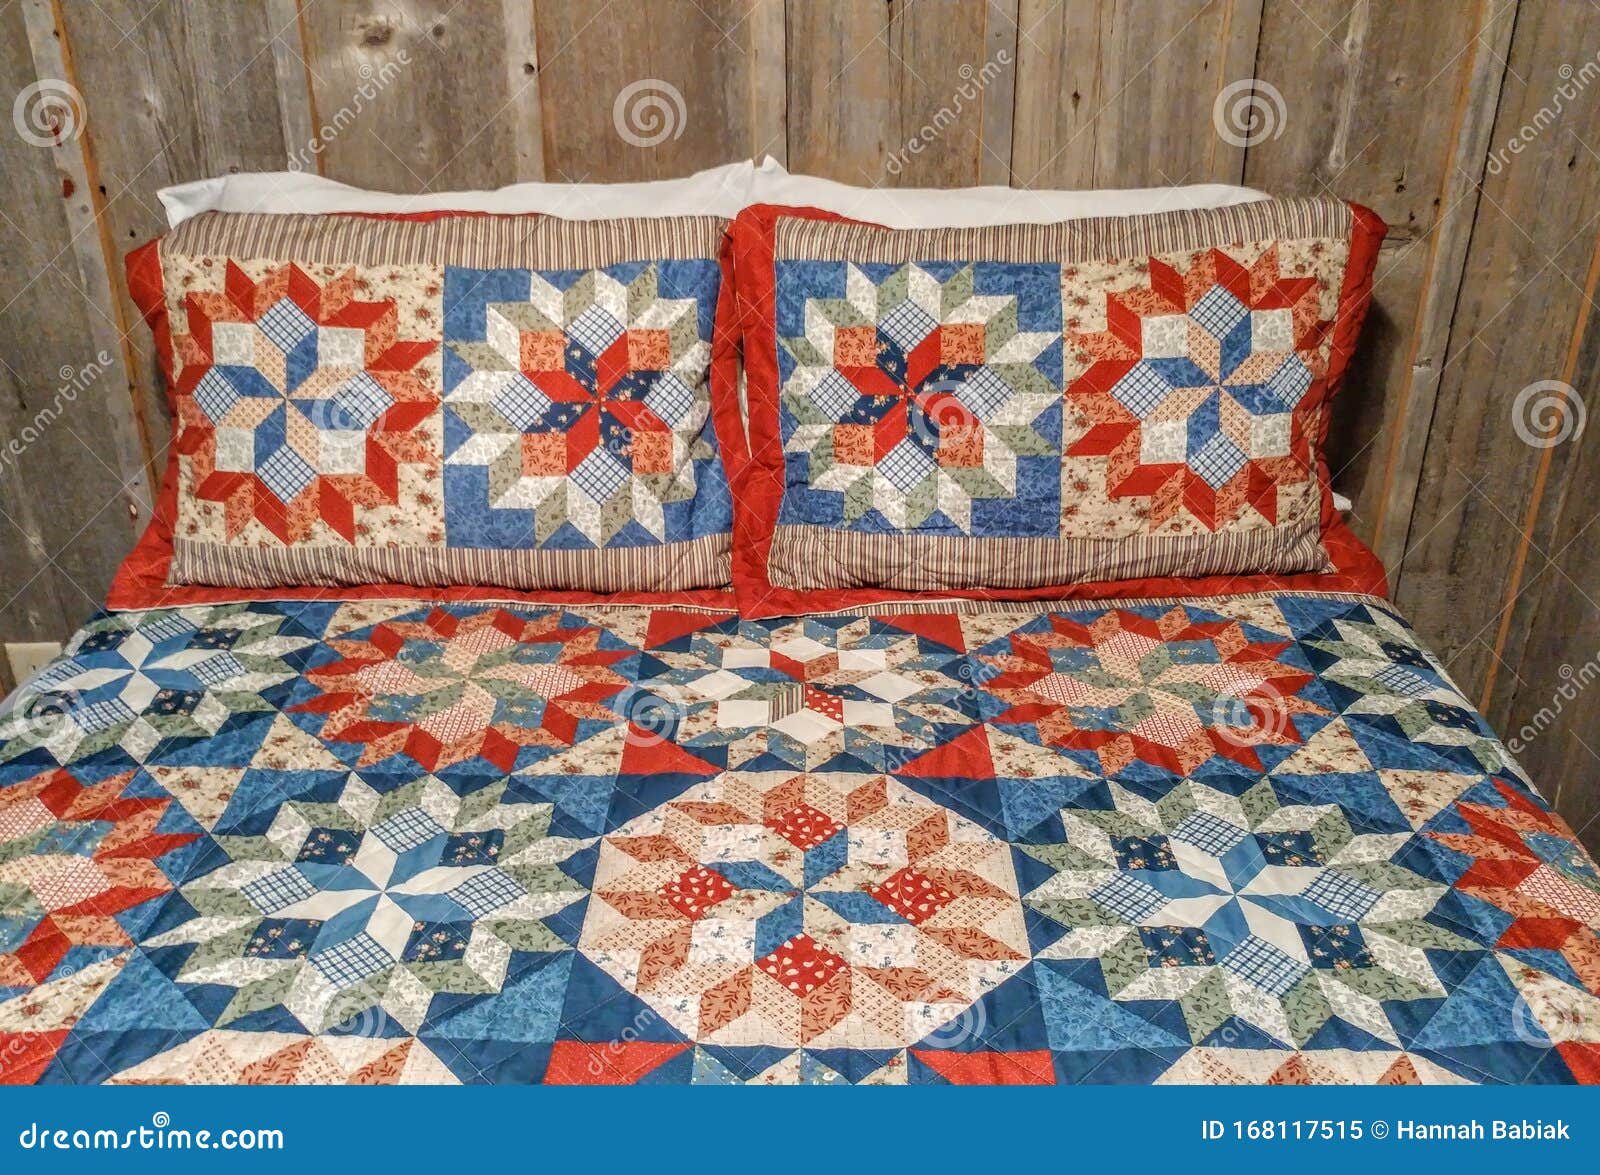 Beautiful Quilt On Queen Size Bed Stock Image Image Of Bedding